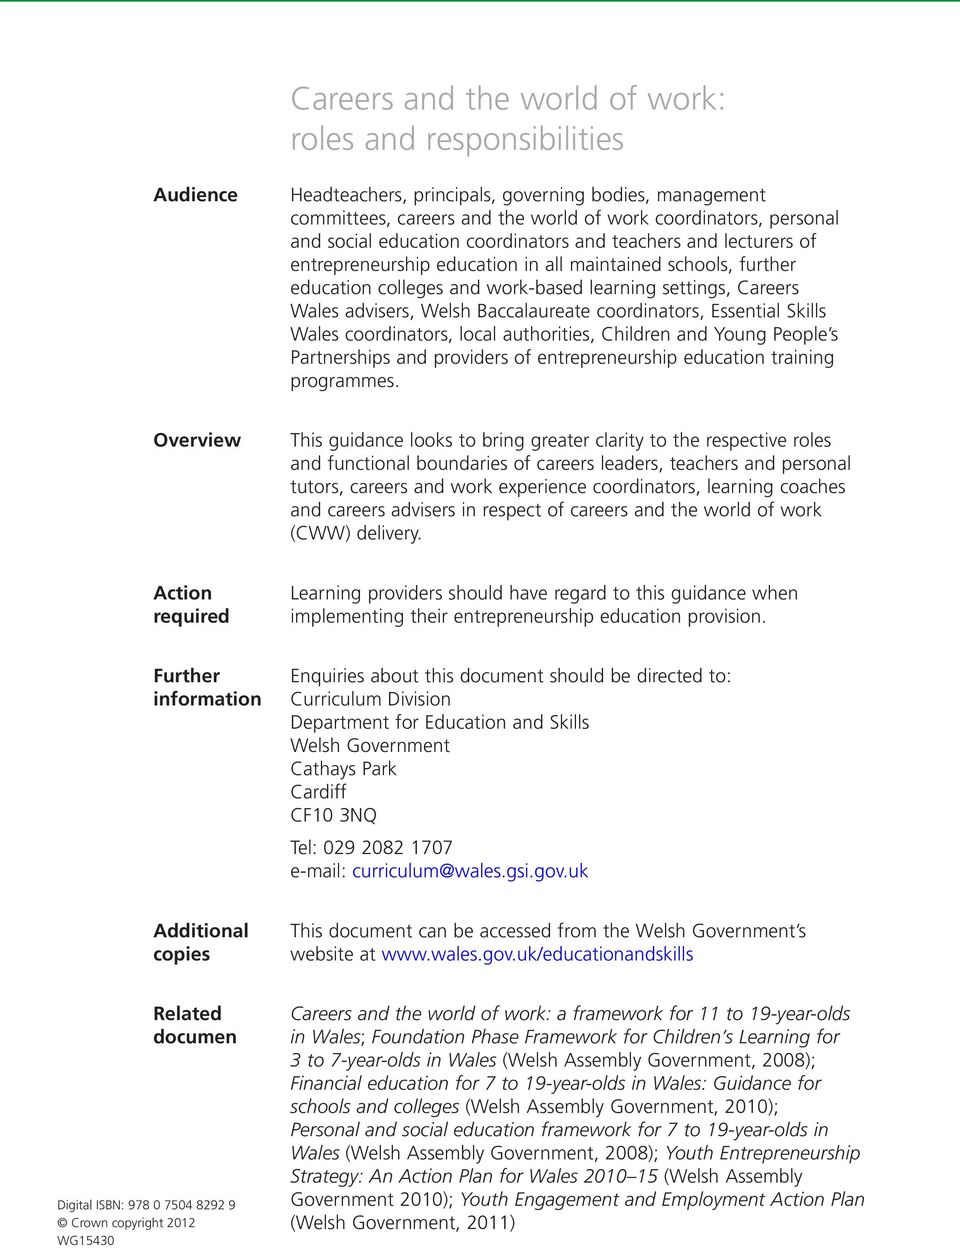 Baccalaureate coordinators, Essential Skills Wales coordinators, local authorities, Children and Young People s Partnerships and providers of entrepreneurship education training programmes.